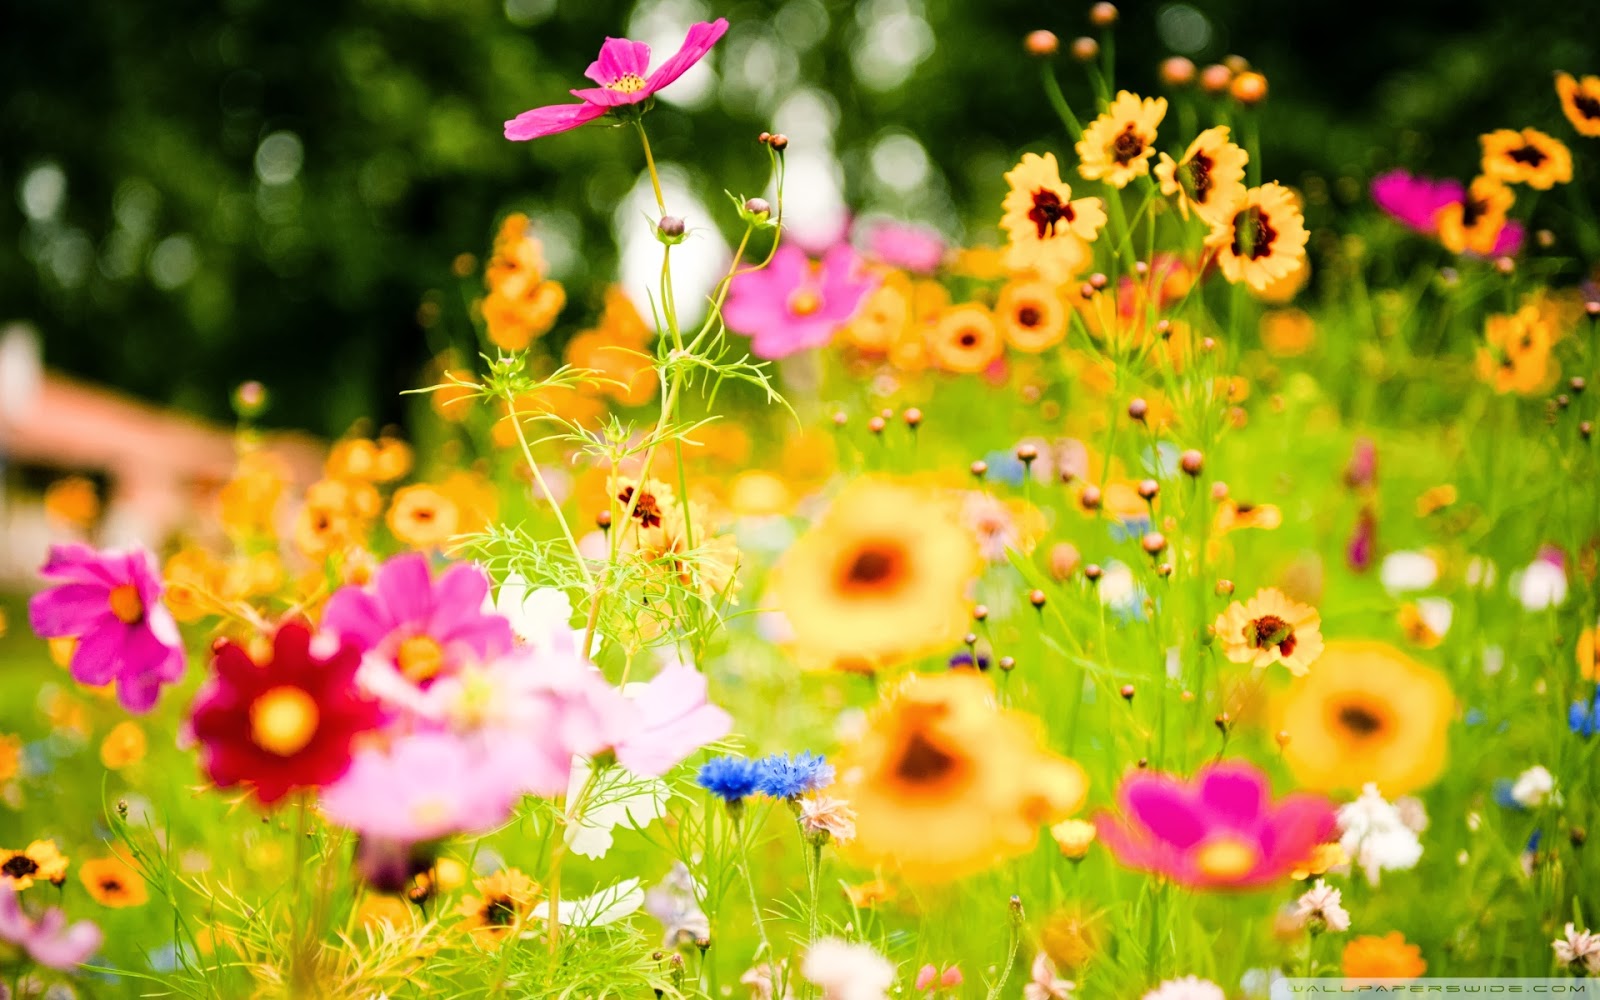  Summer flowers wallpaper and make this Summer flowers wallpaper for